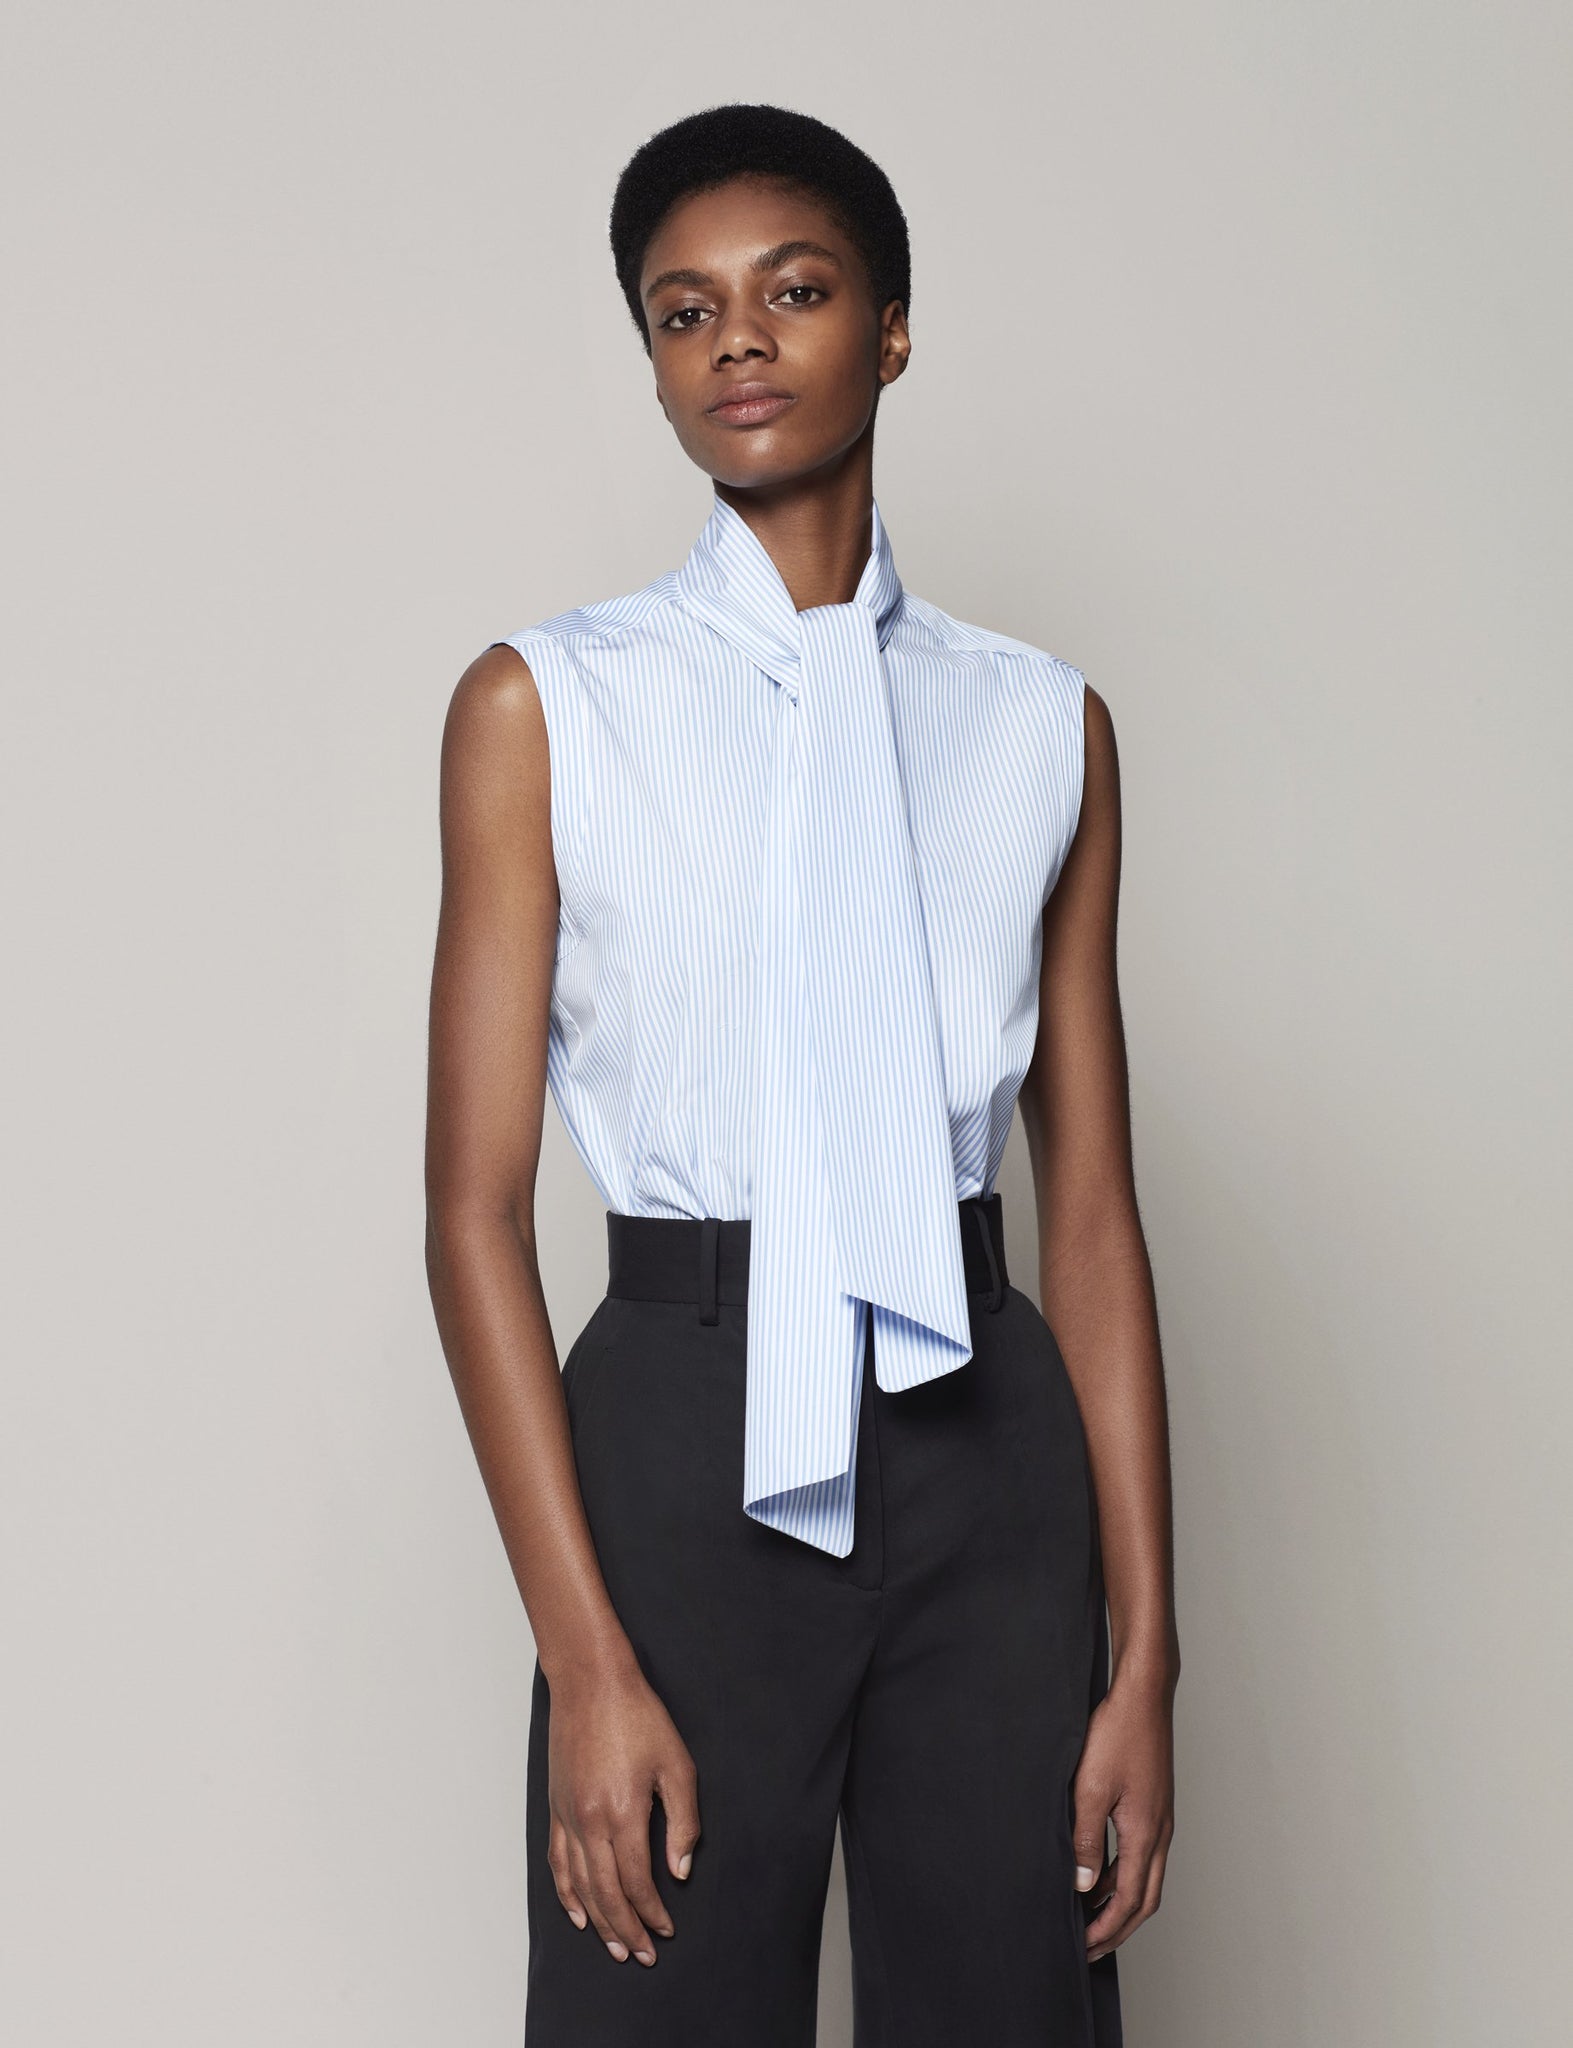 Another Tomorrow Sleeveless Tie Blouse In Blue Stripe